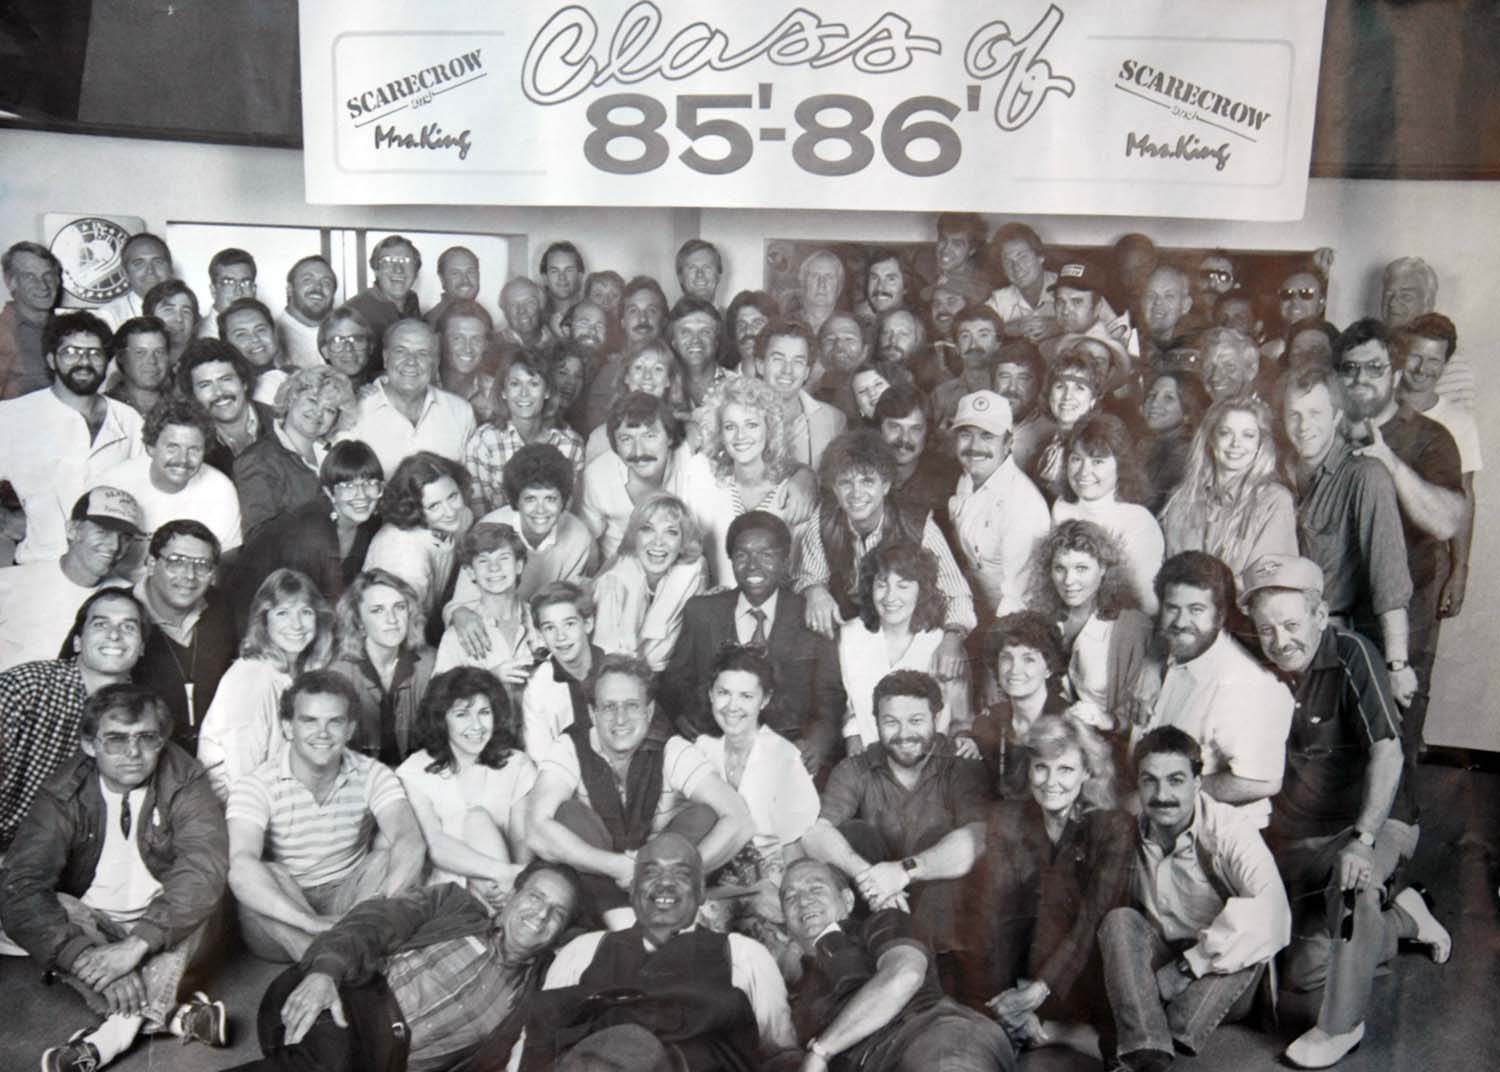 Dennis with cast & crew of Scarecrow & Mrs. King 85-86